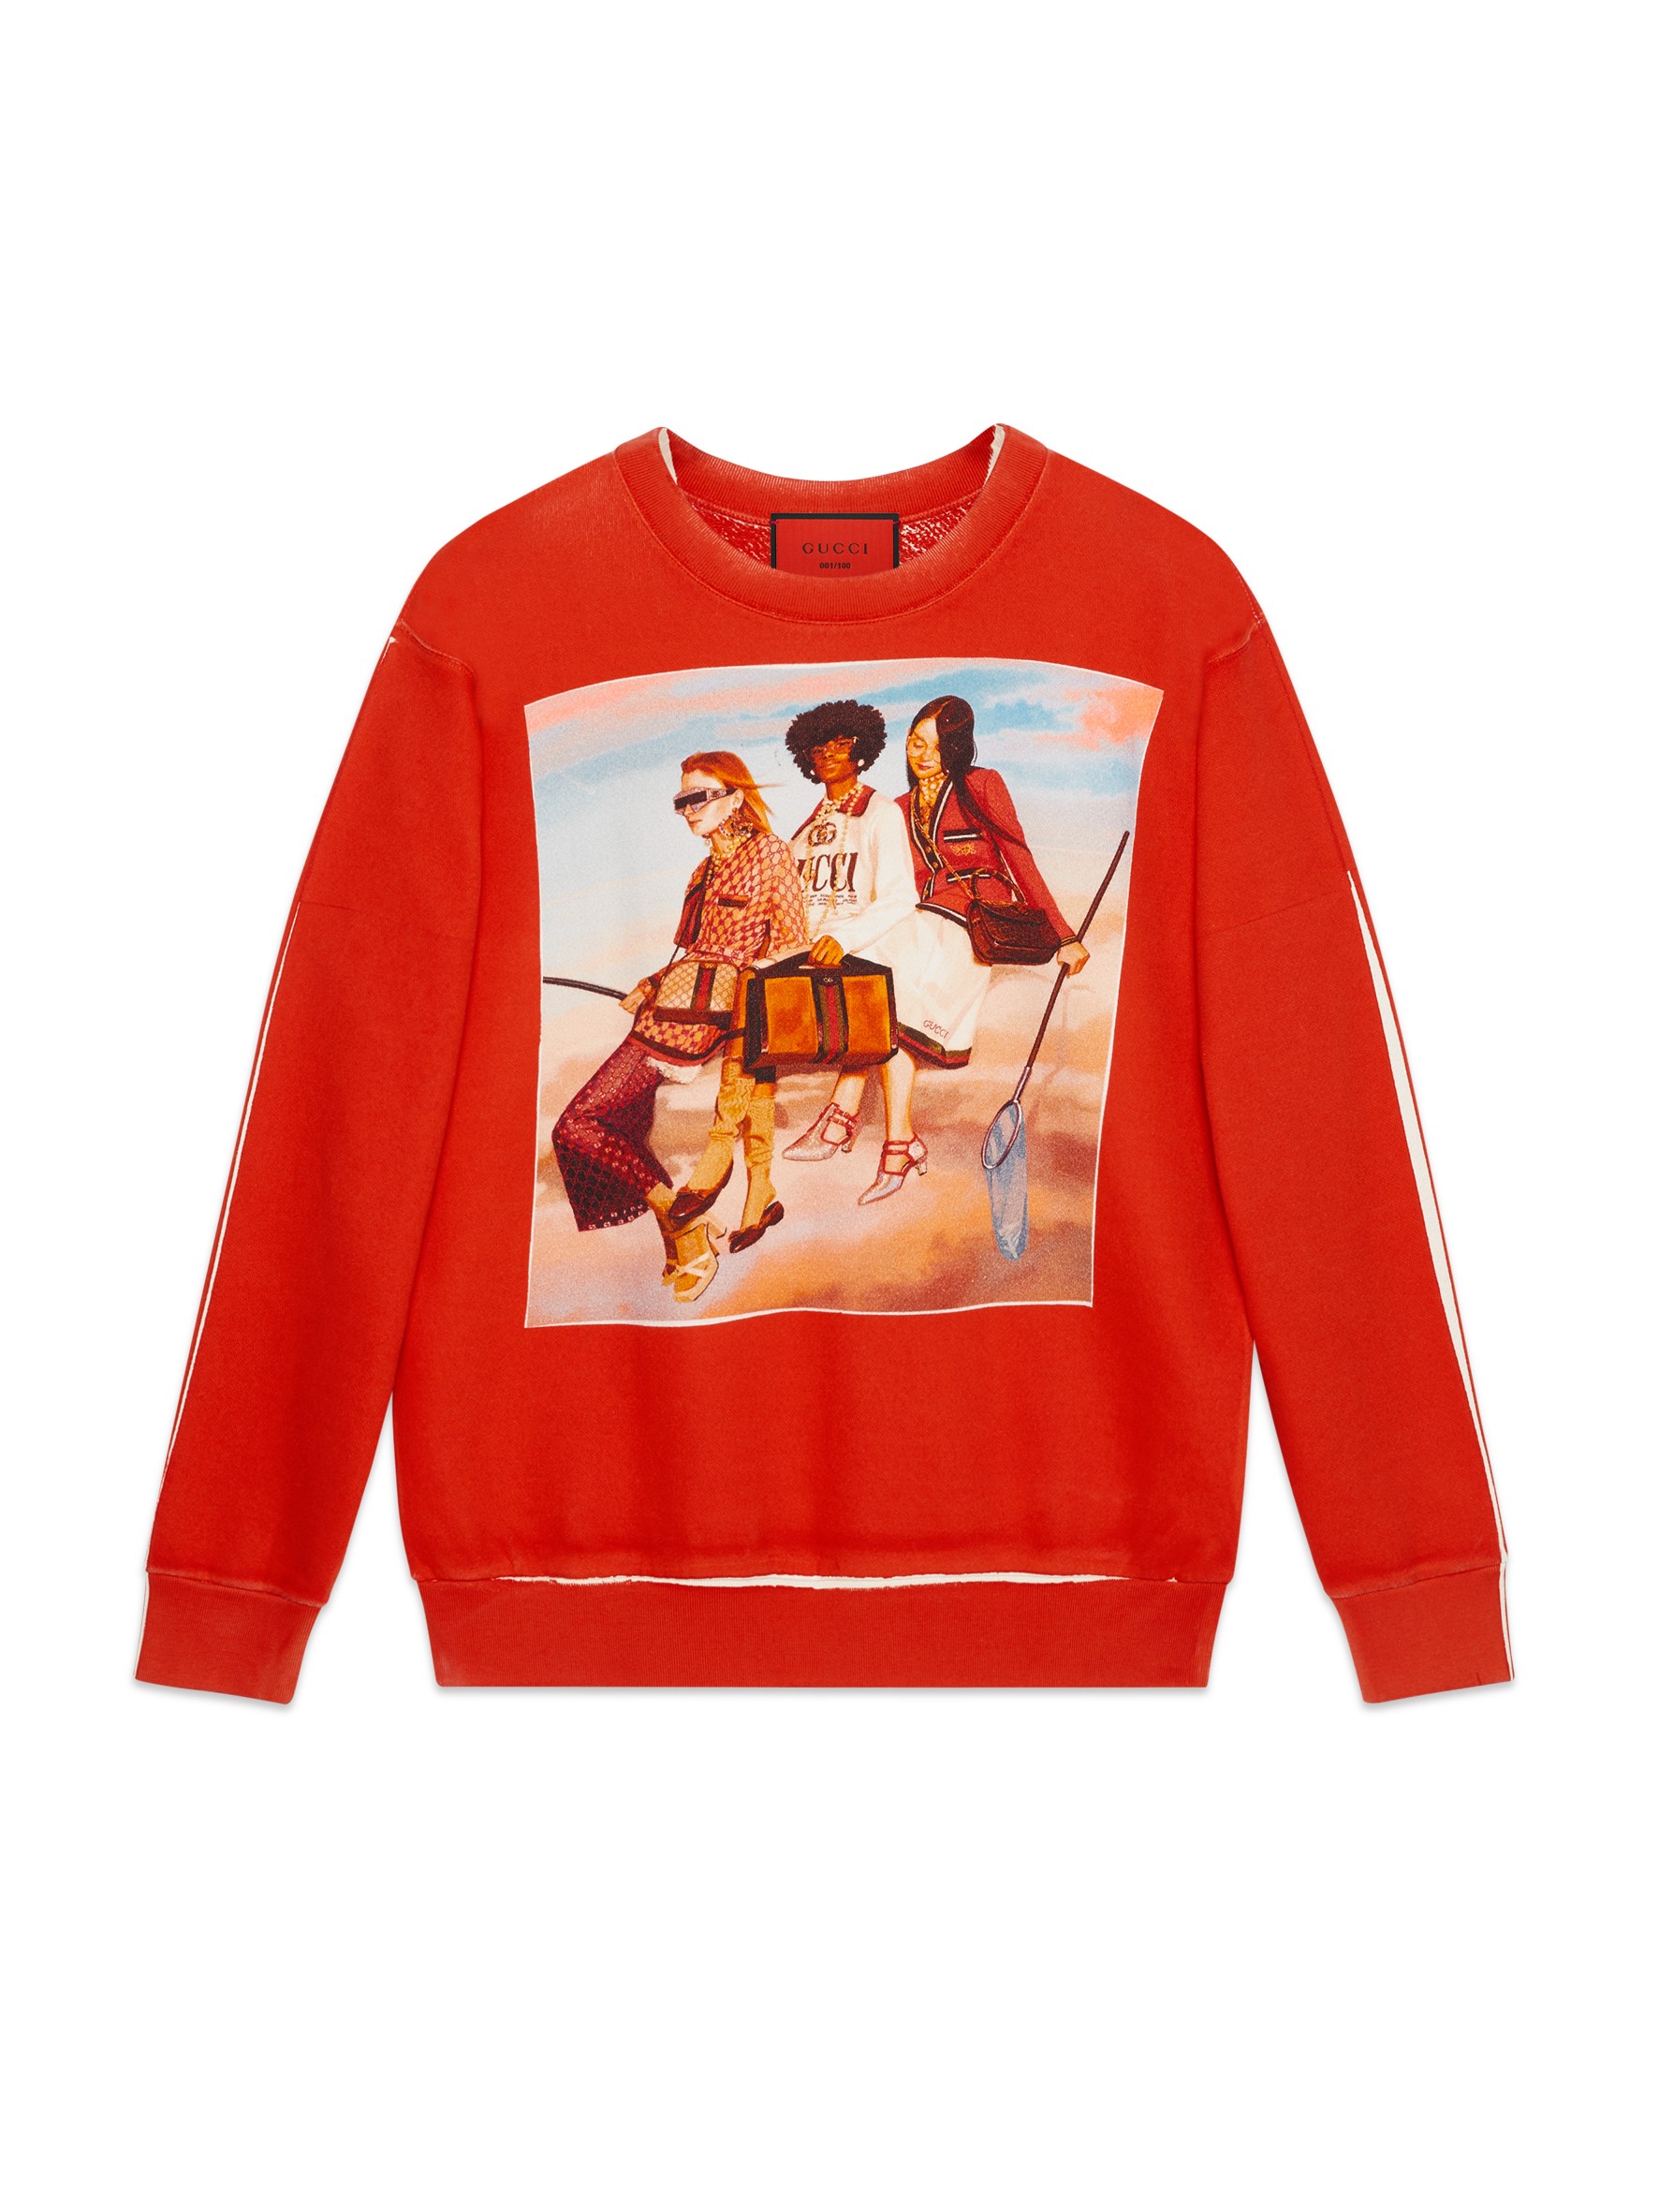 A sweatshirt in the #GucciHallucination line-up